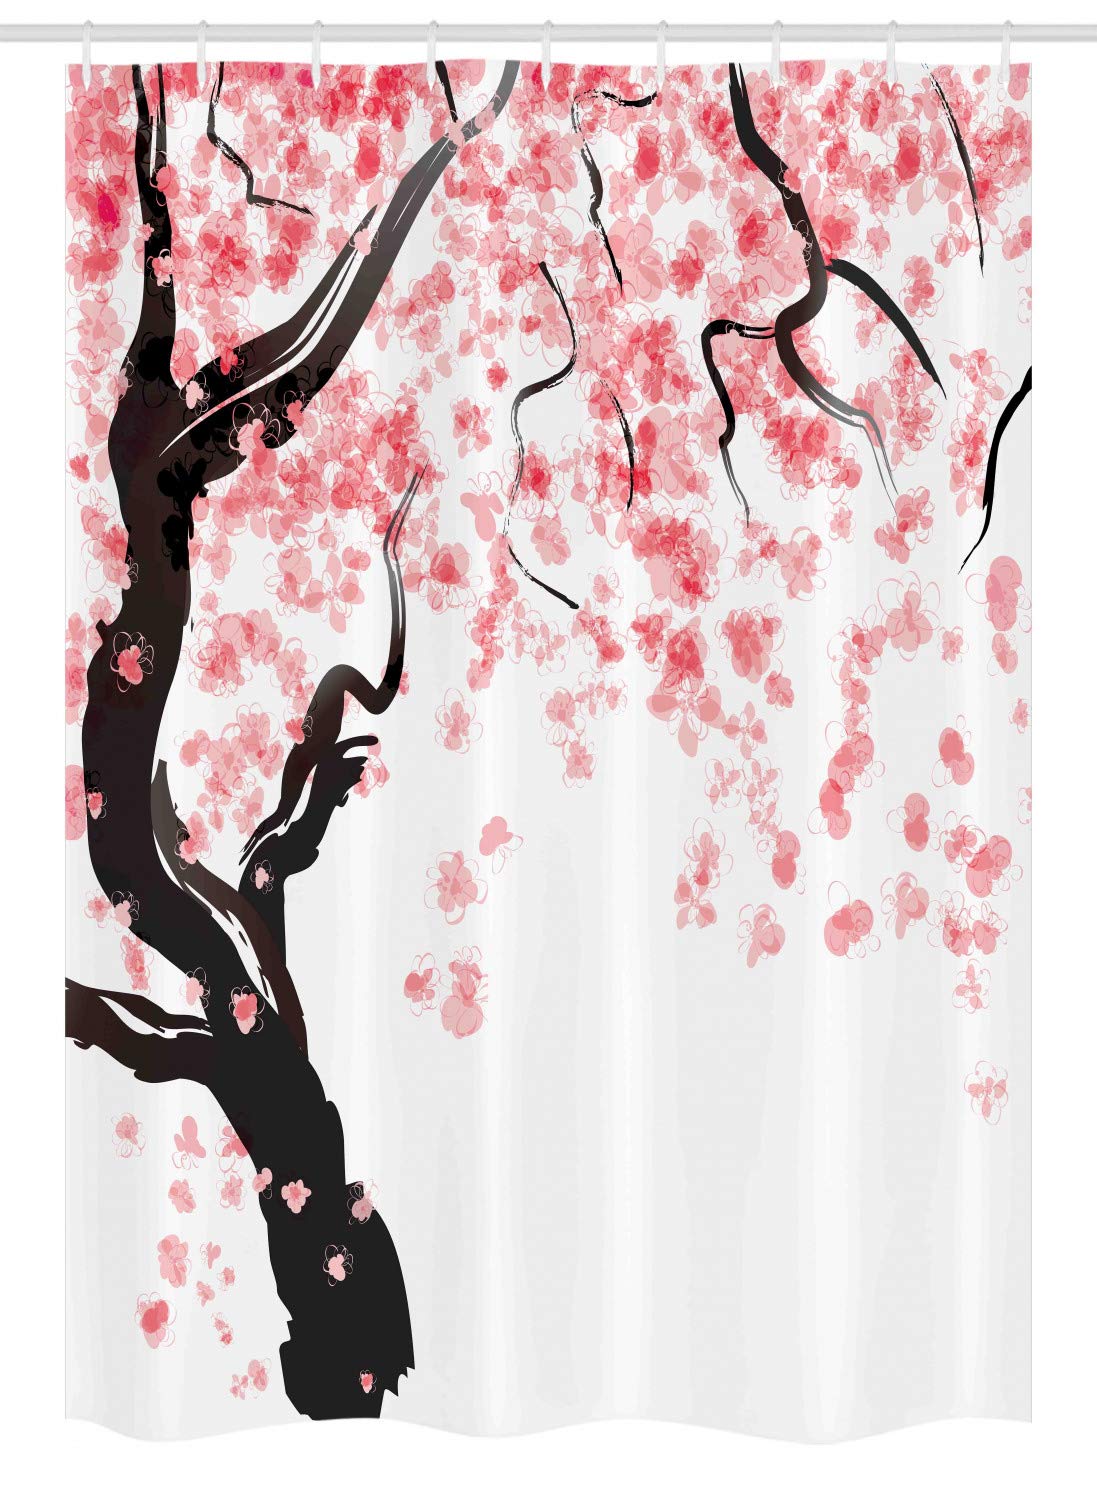 Ambesonne Floral Stall Shower Curtain, Dogwood Tree Blossom in Watercolor Painting Effect Spring Season Theme Pinkish Tones, Fabric Bathroom Decor Set with Hooks, 54" X 78", Black Pink